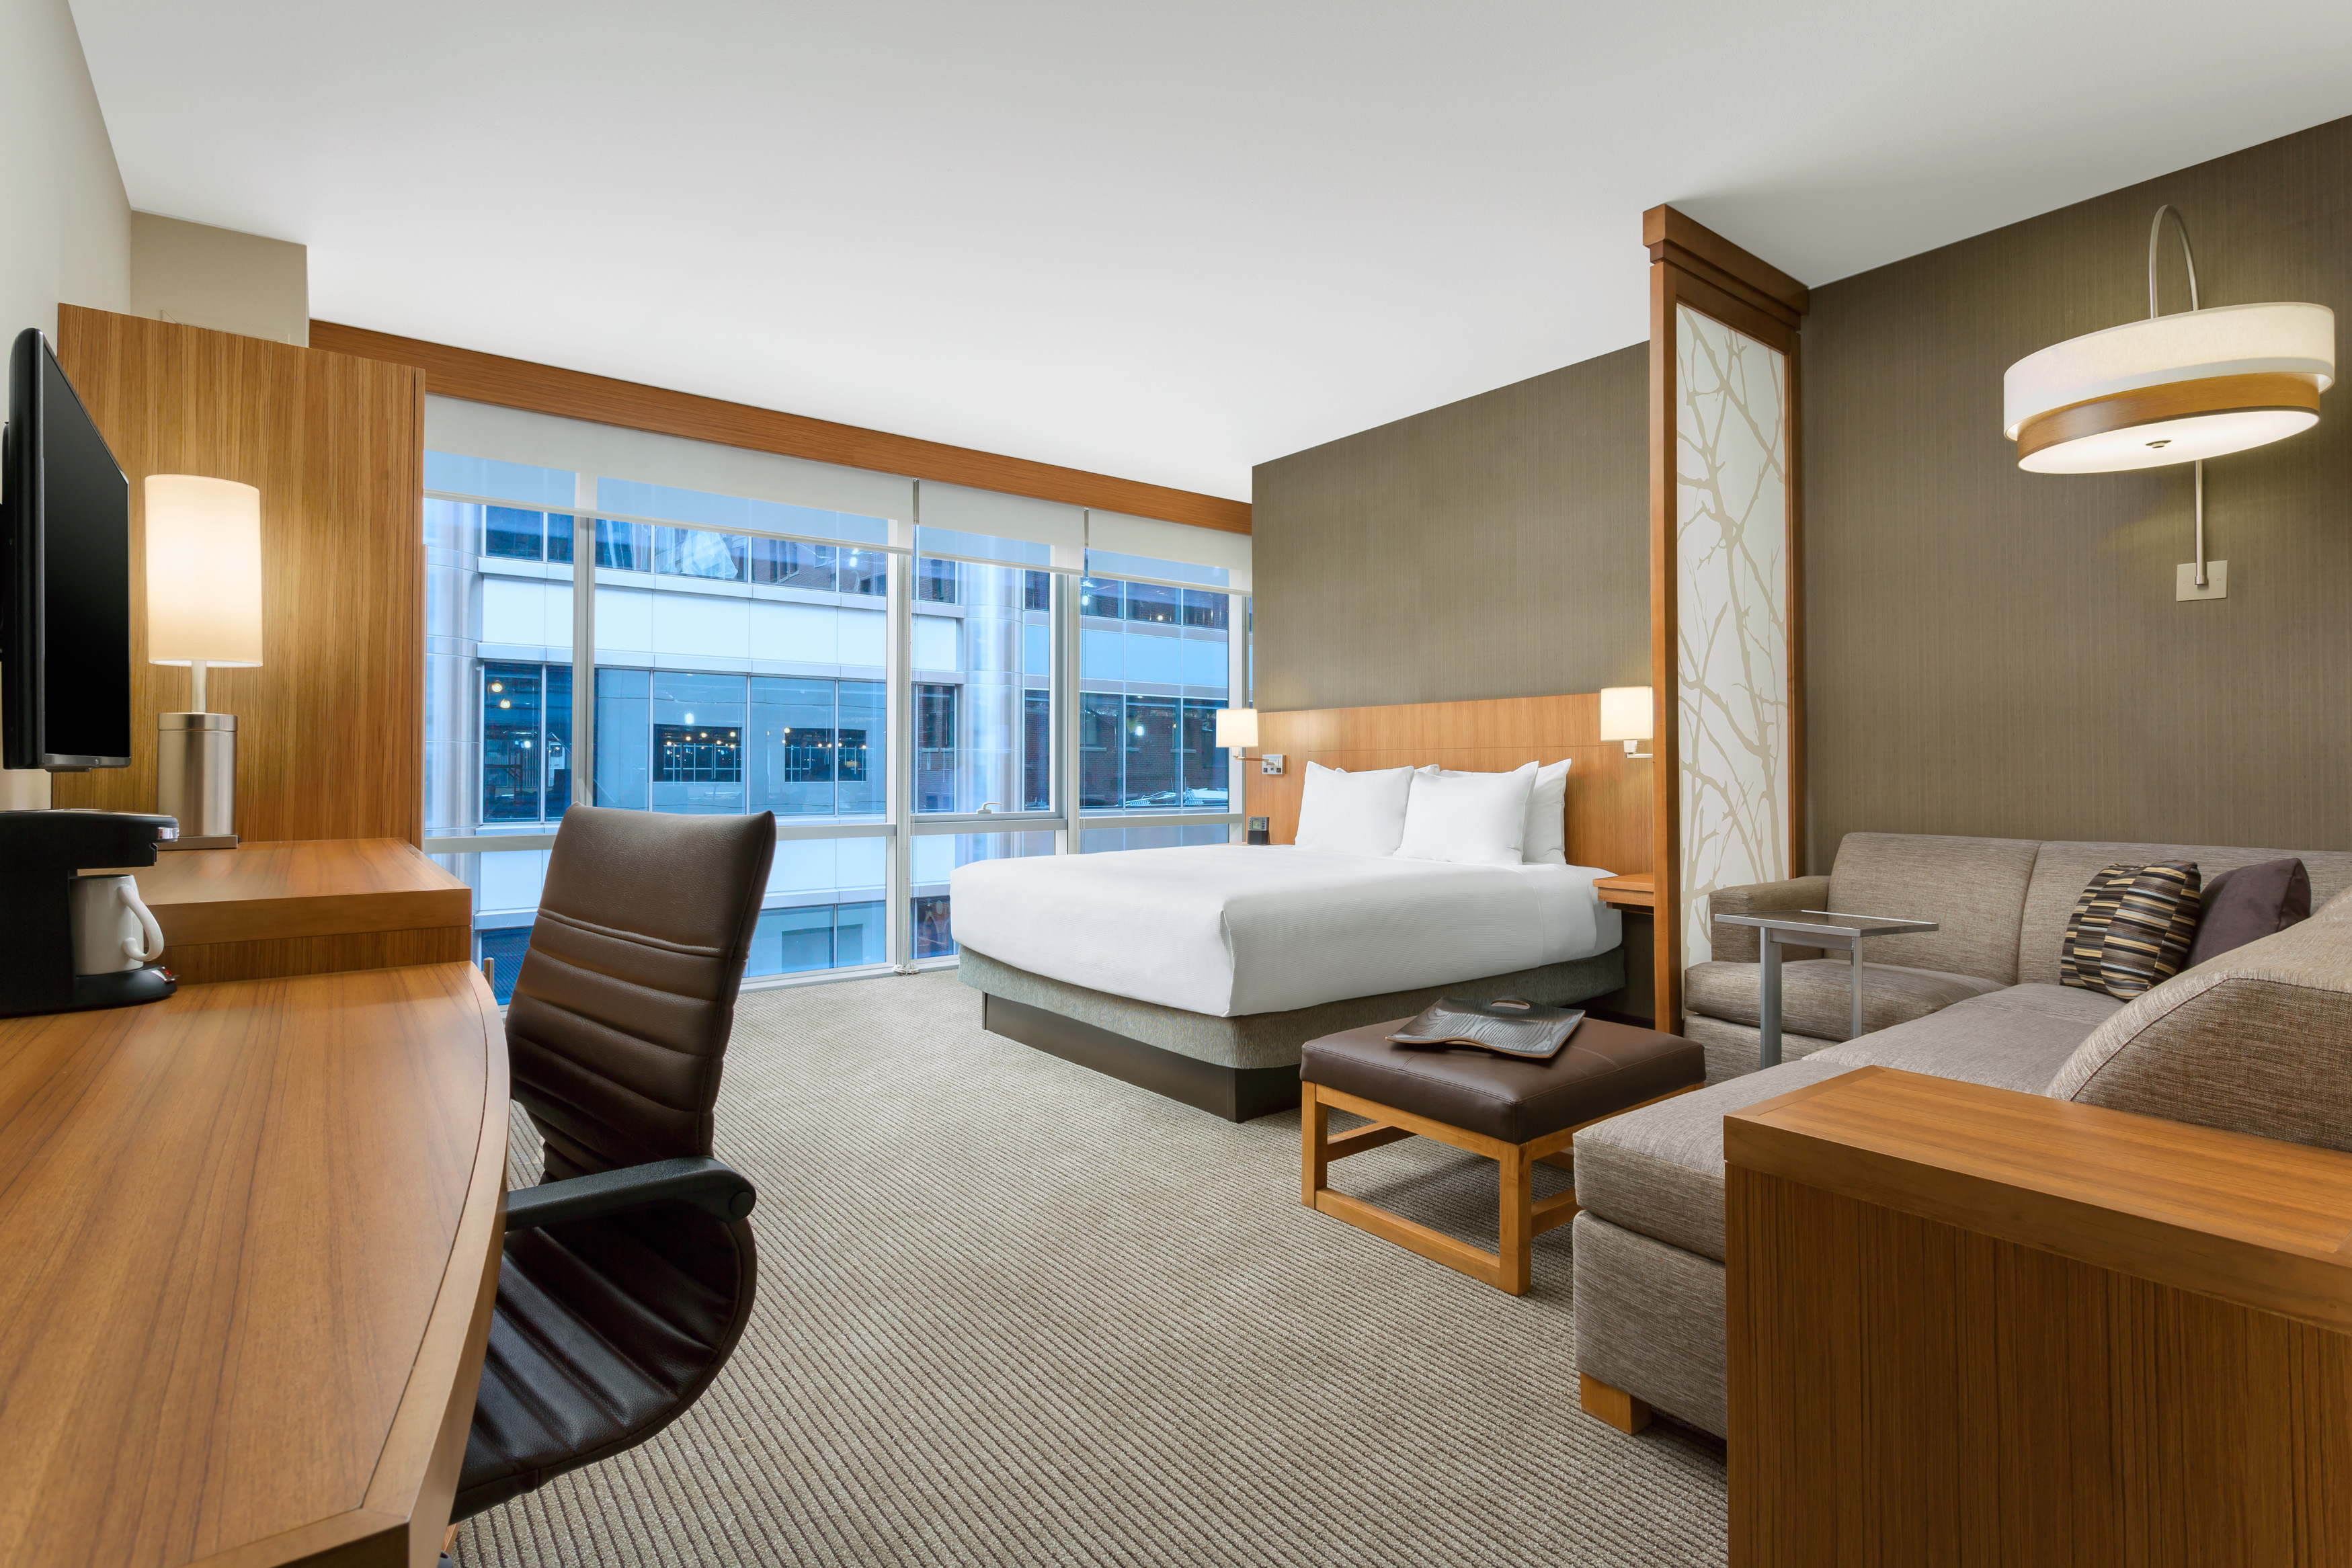 The specialty king suite is extra spacious offering 100 additional sq. f.t of space and features a separate sleeping and living area, with mini-refrigerator, single serve coffee maker, free Wi-Fi, a Cozy Corner with sofa sleeper, and bathroom with double vanity sinks.